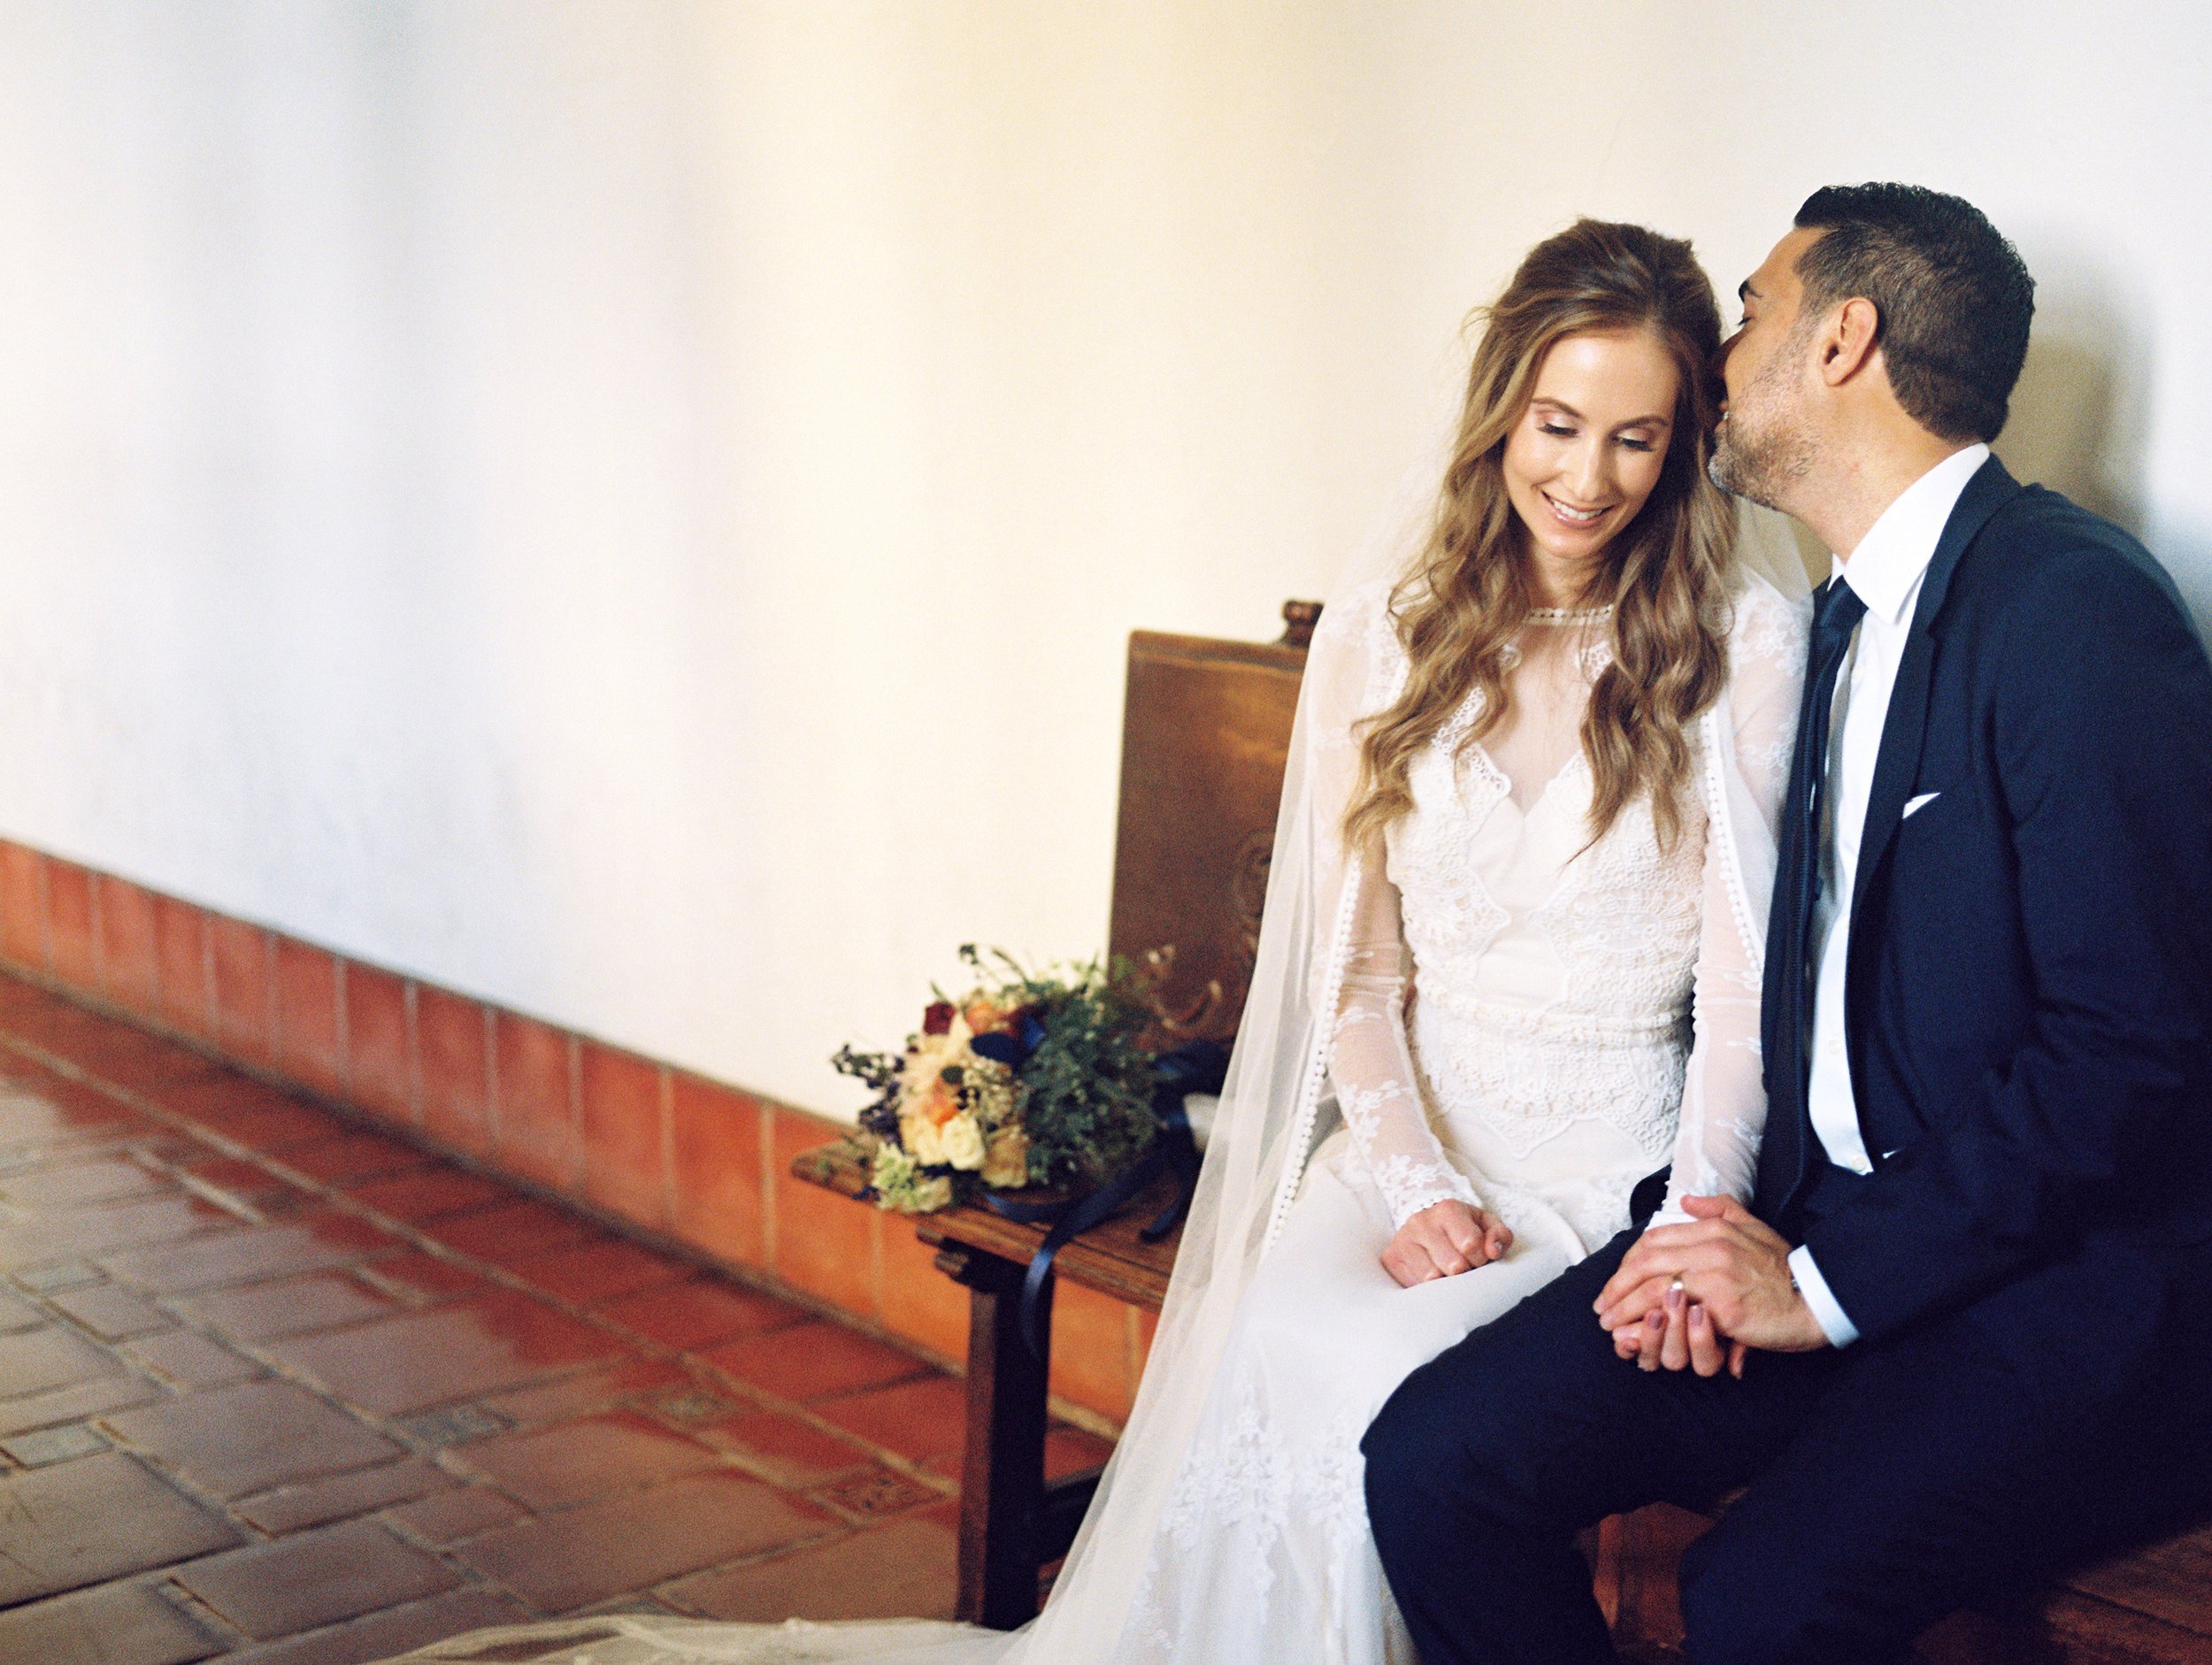 www.santabarbarawedding.com | Ryanne Bee Photography | Santa Barbara Courthouse | Dreamers and Lovers | Couple Sharing a Moment